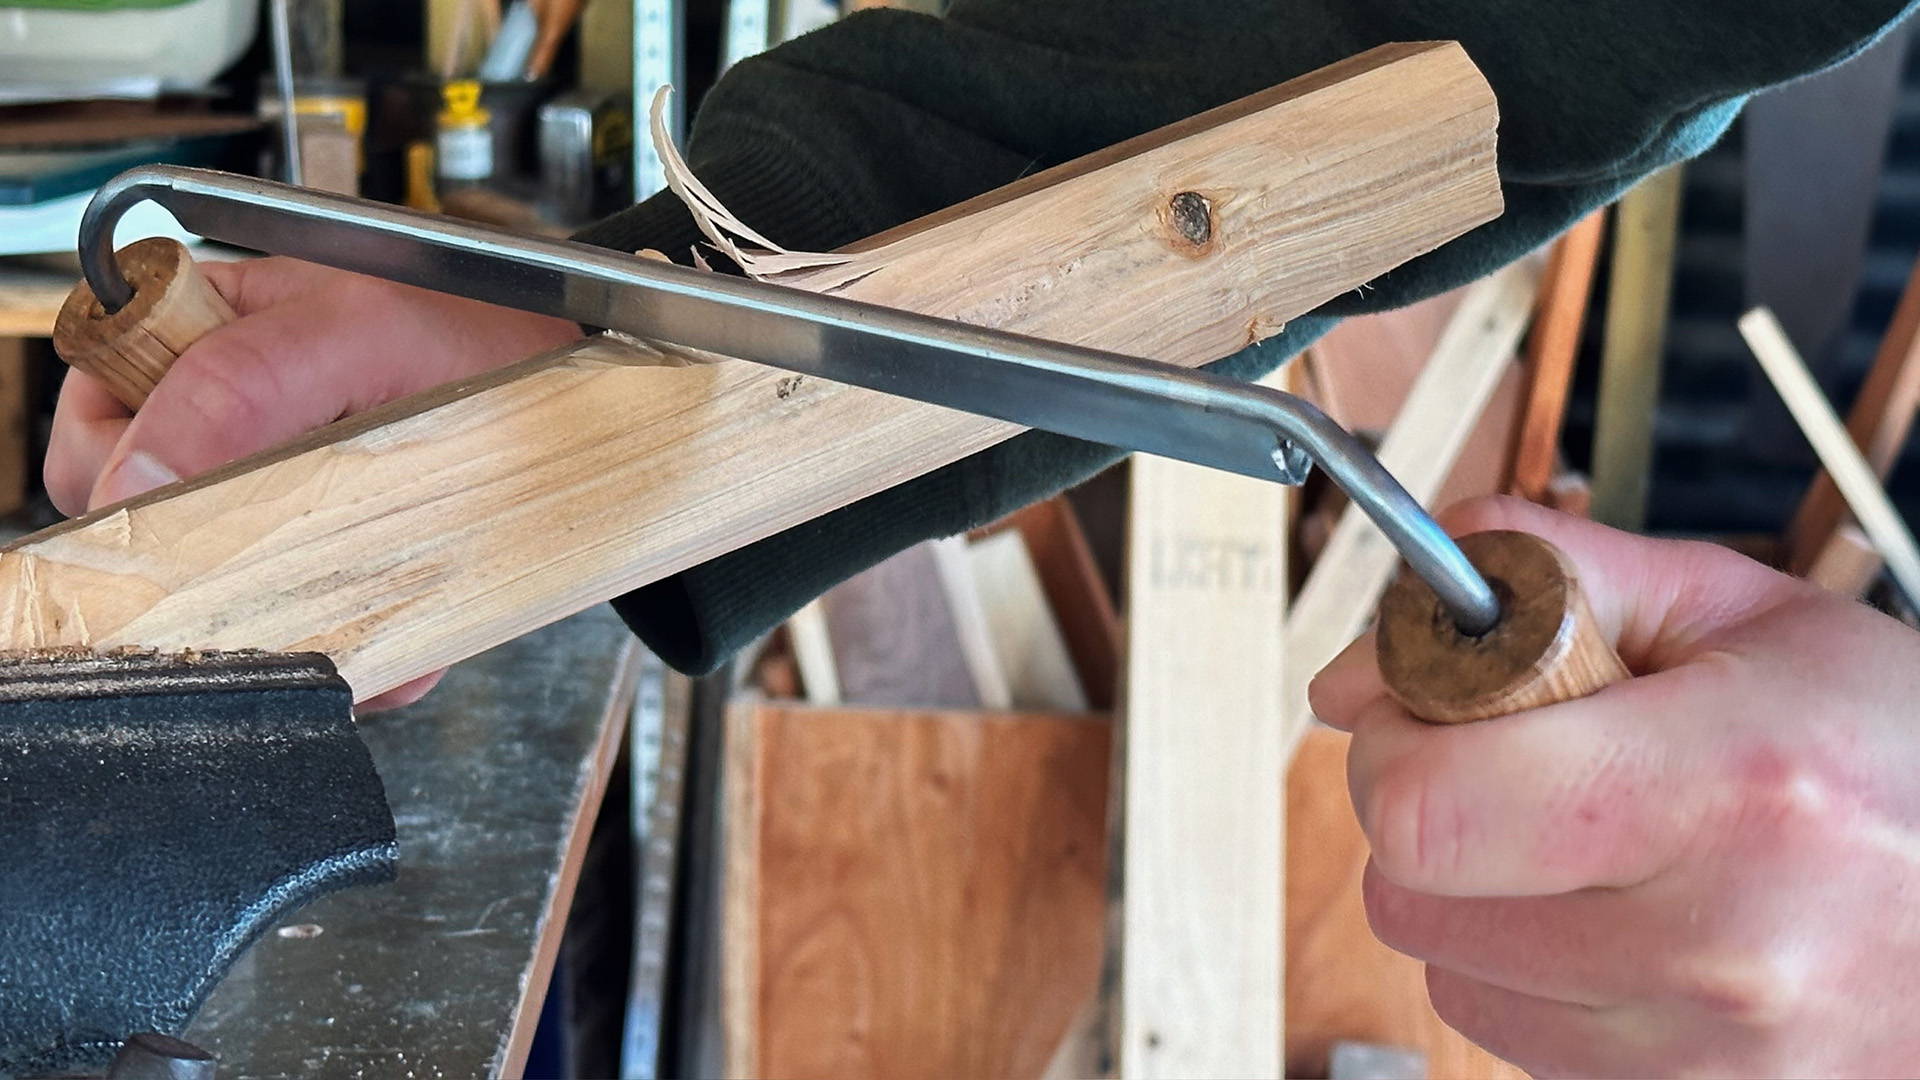 Drawknife Basics: The Surprisingly Versatile Hand Tool You Should